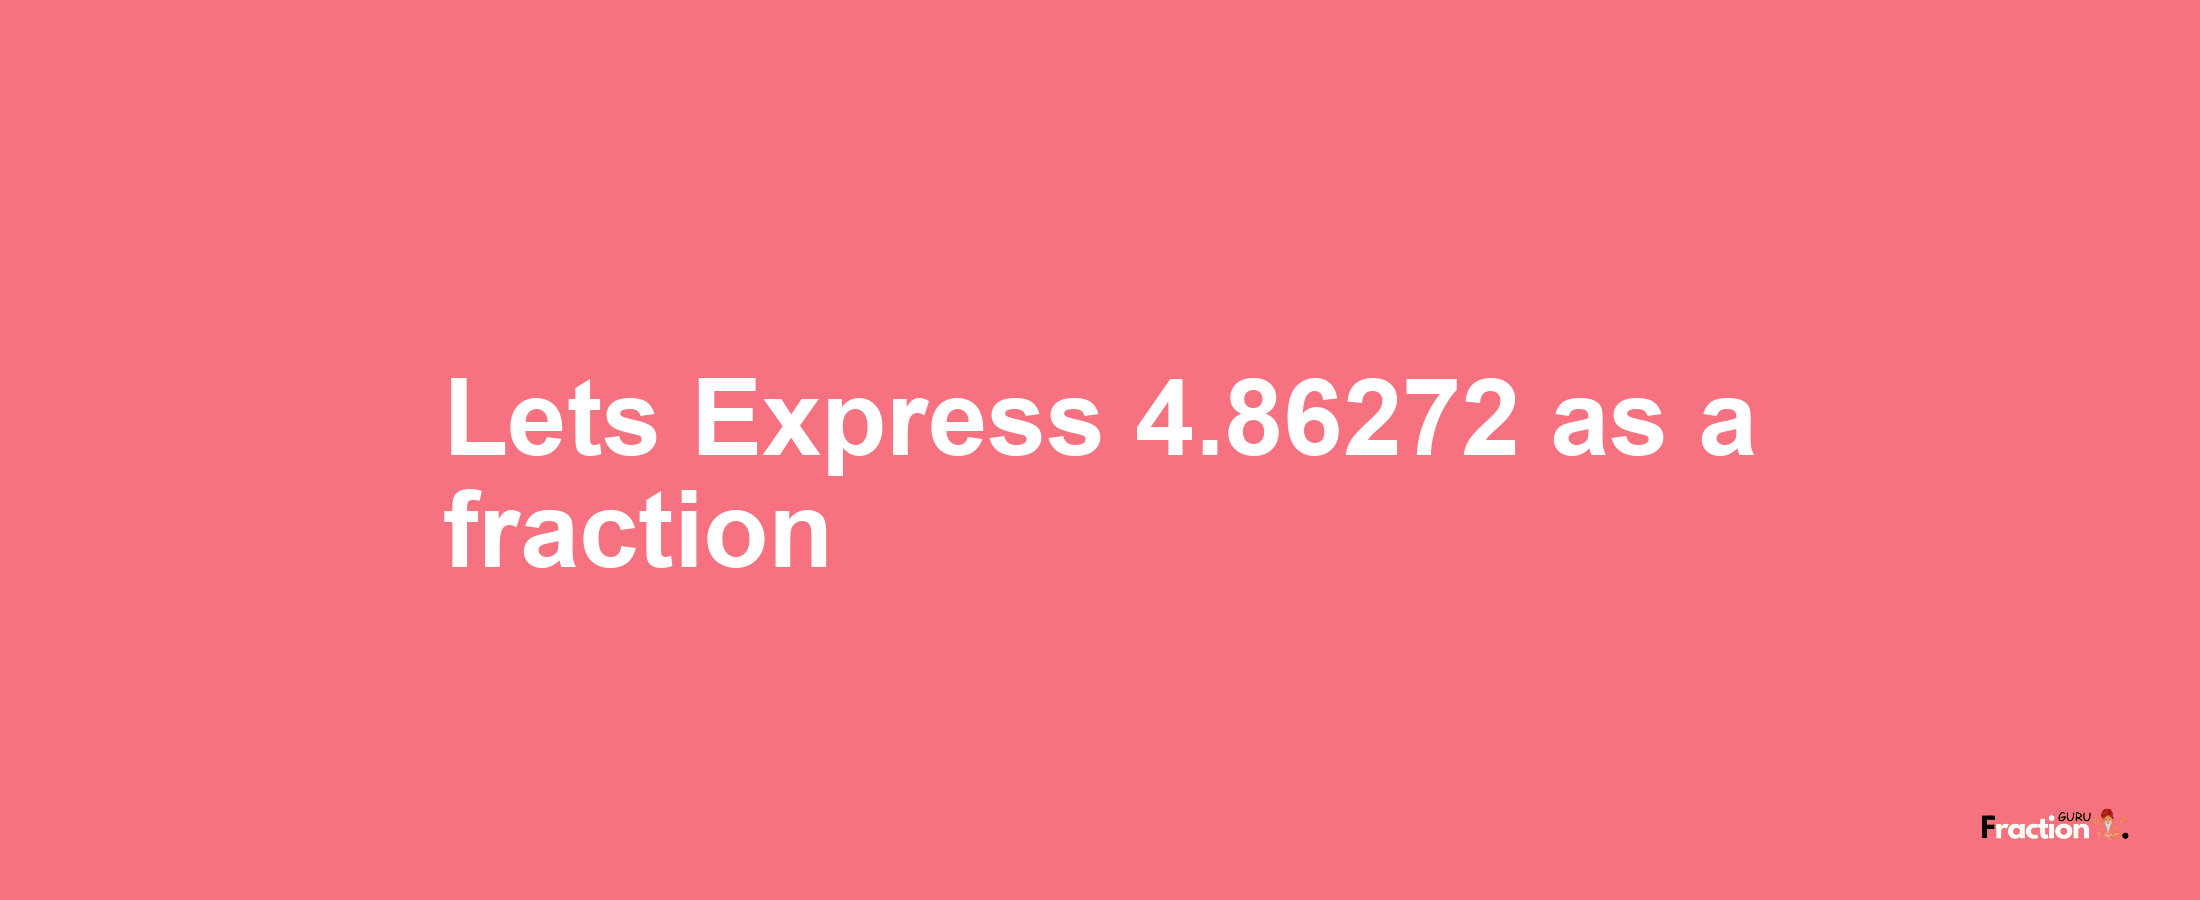 Lets Express 4.86272 as afraction